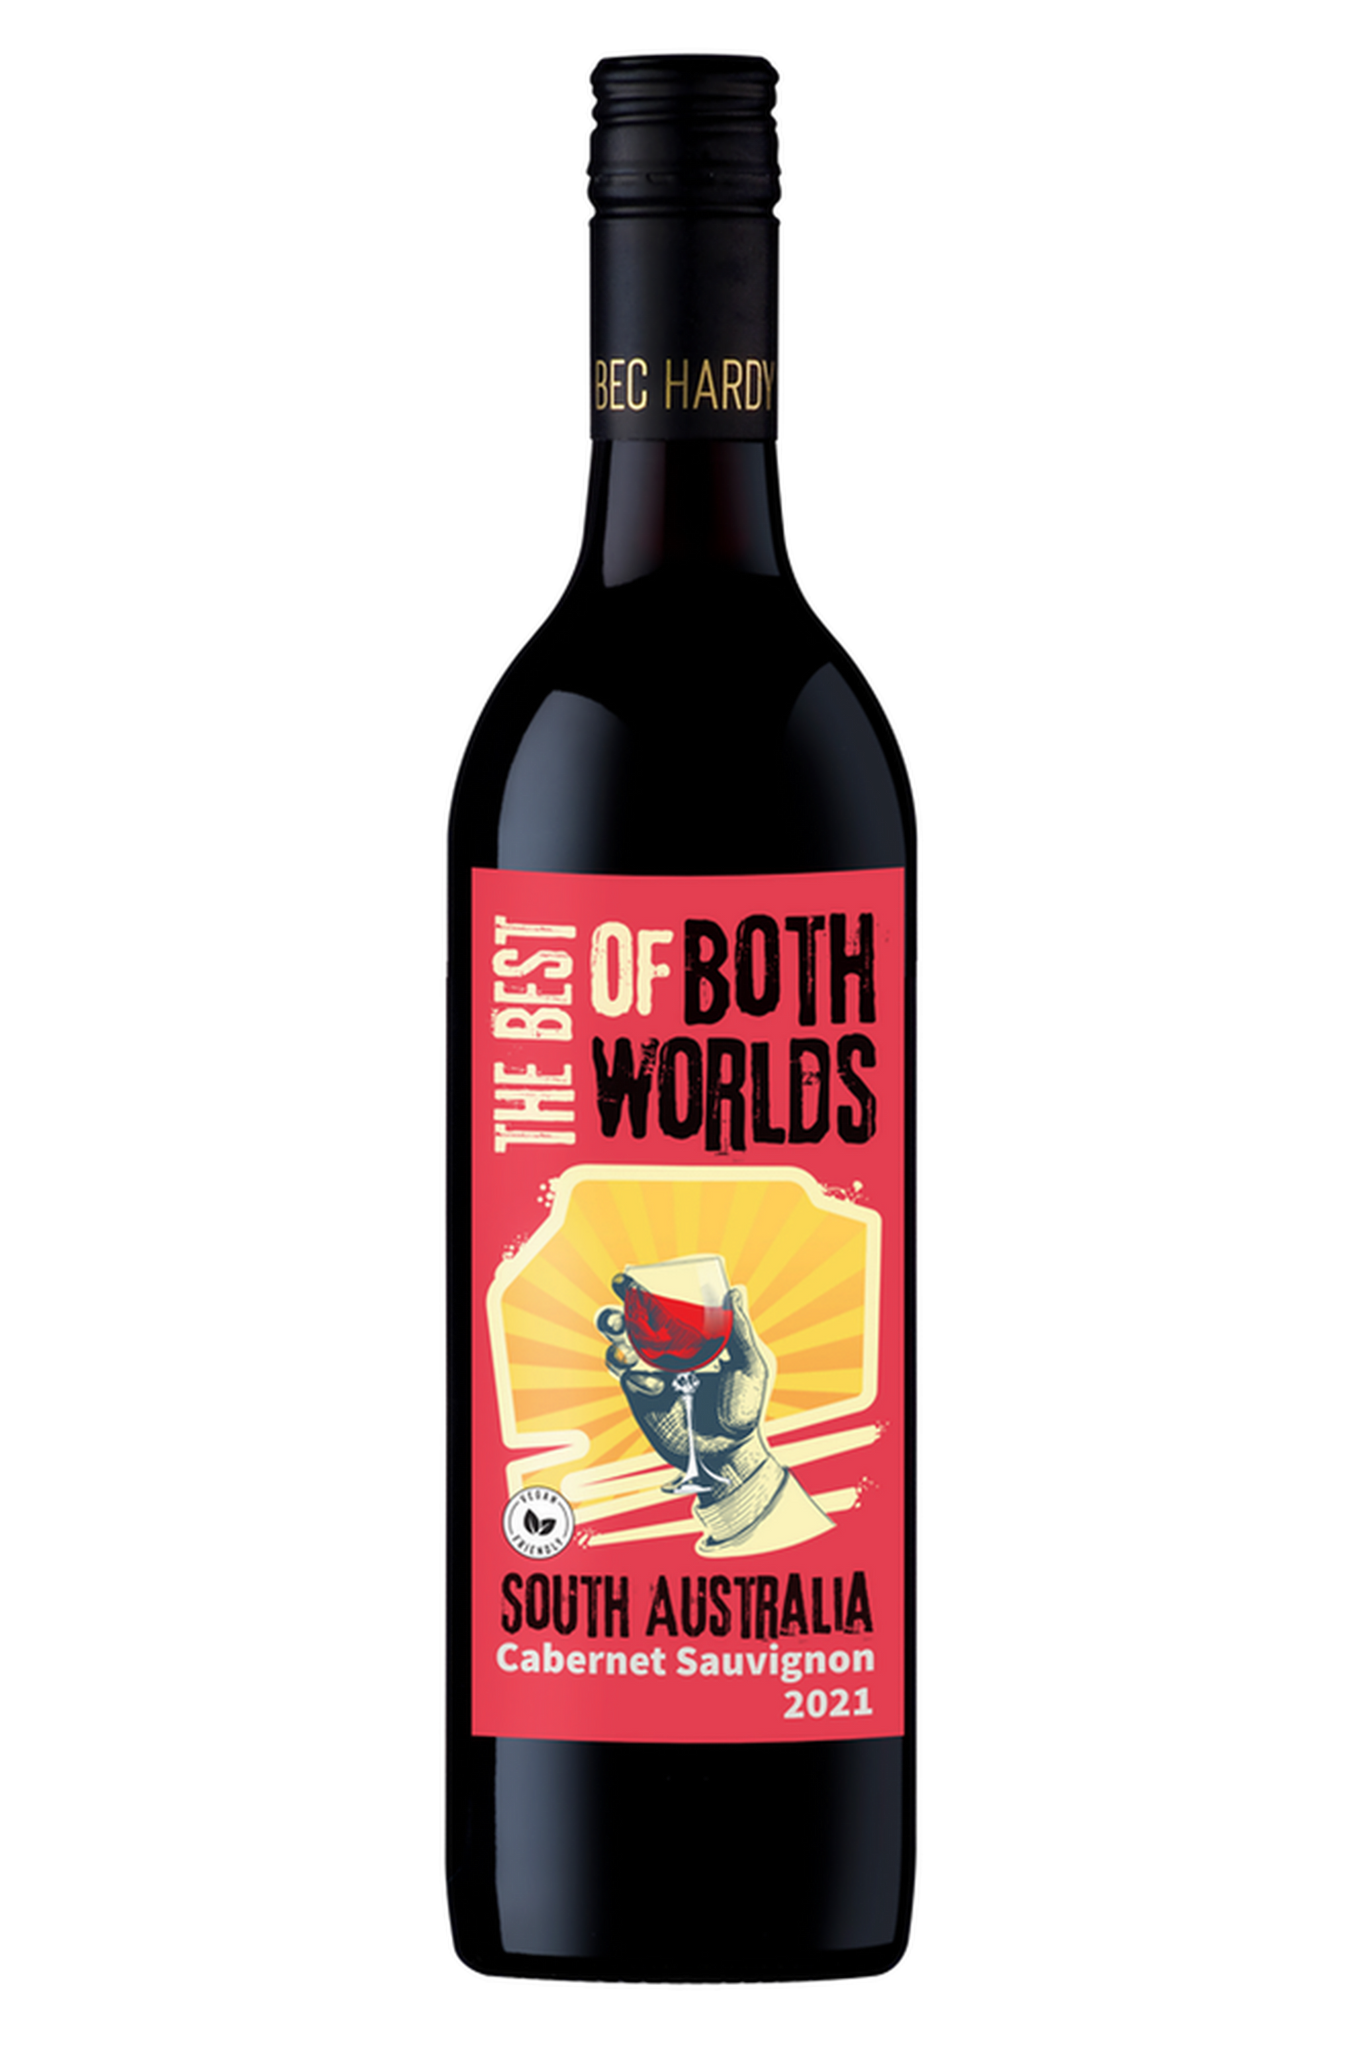 The Best of Both Worlds Cabernet Sauvignon 2021